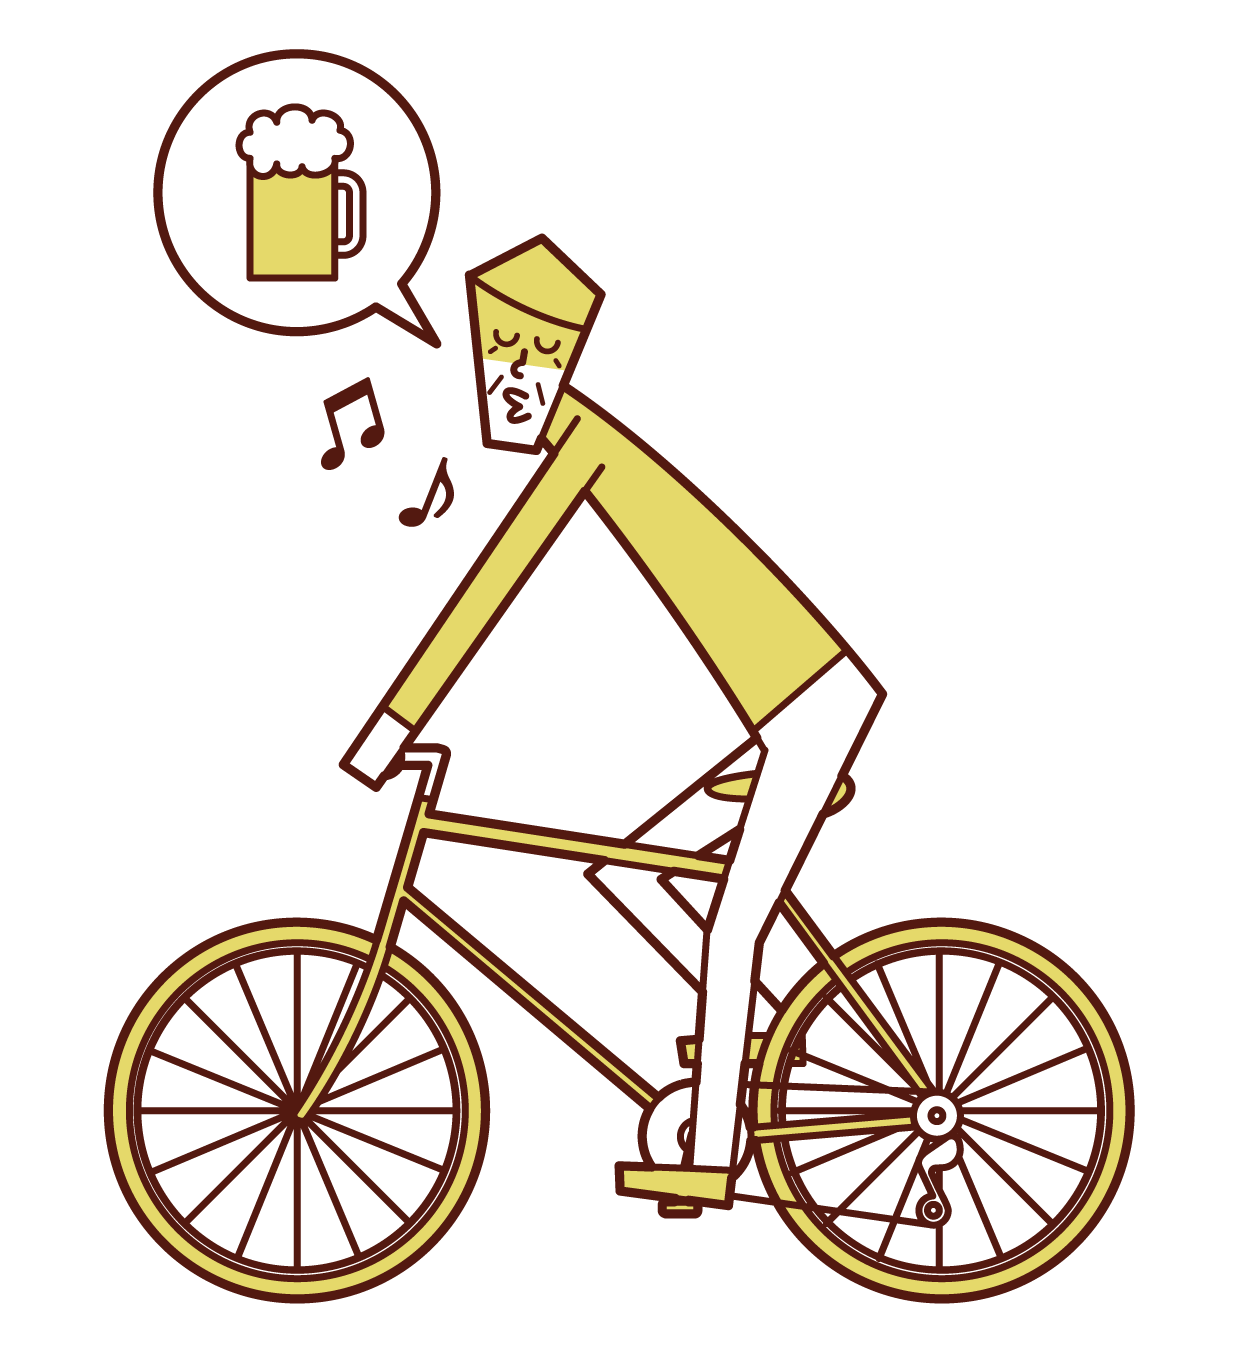 Illustration of a drunk driver (old man) driving drunk on a bicycle